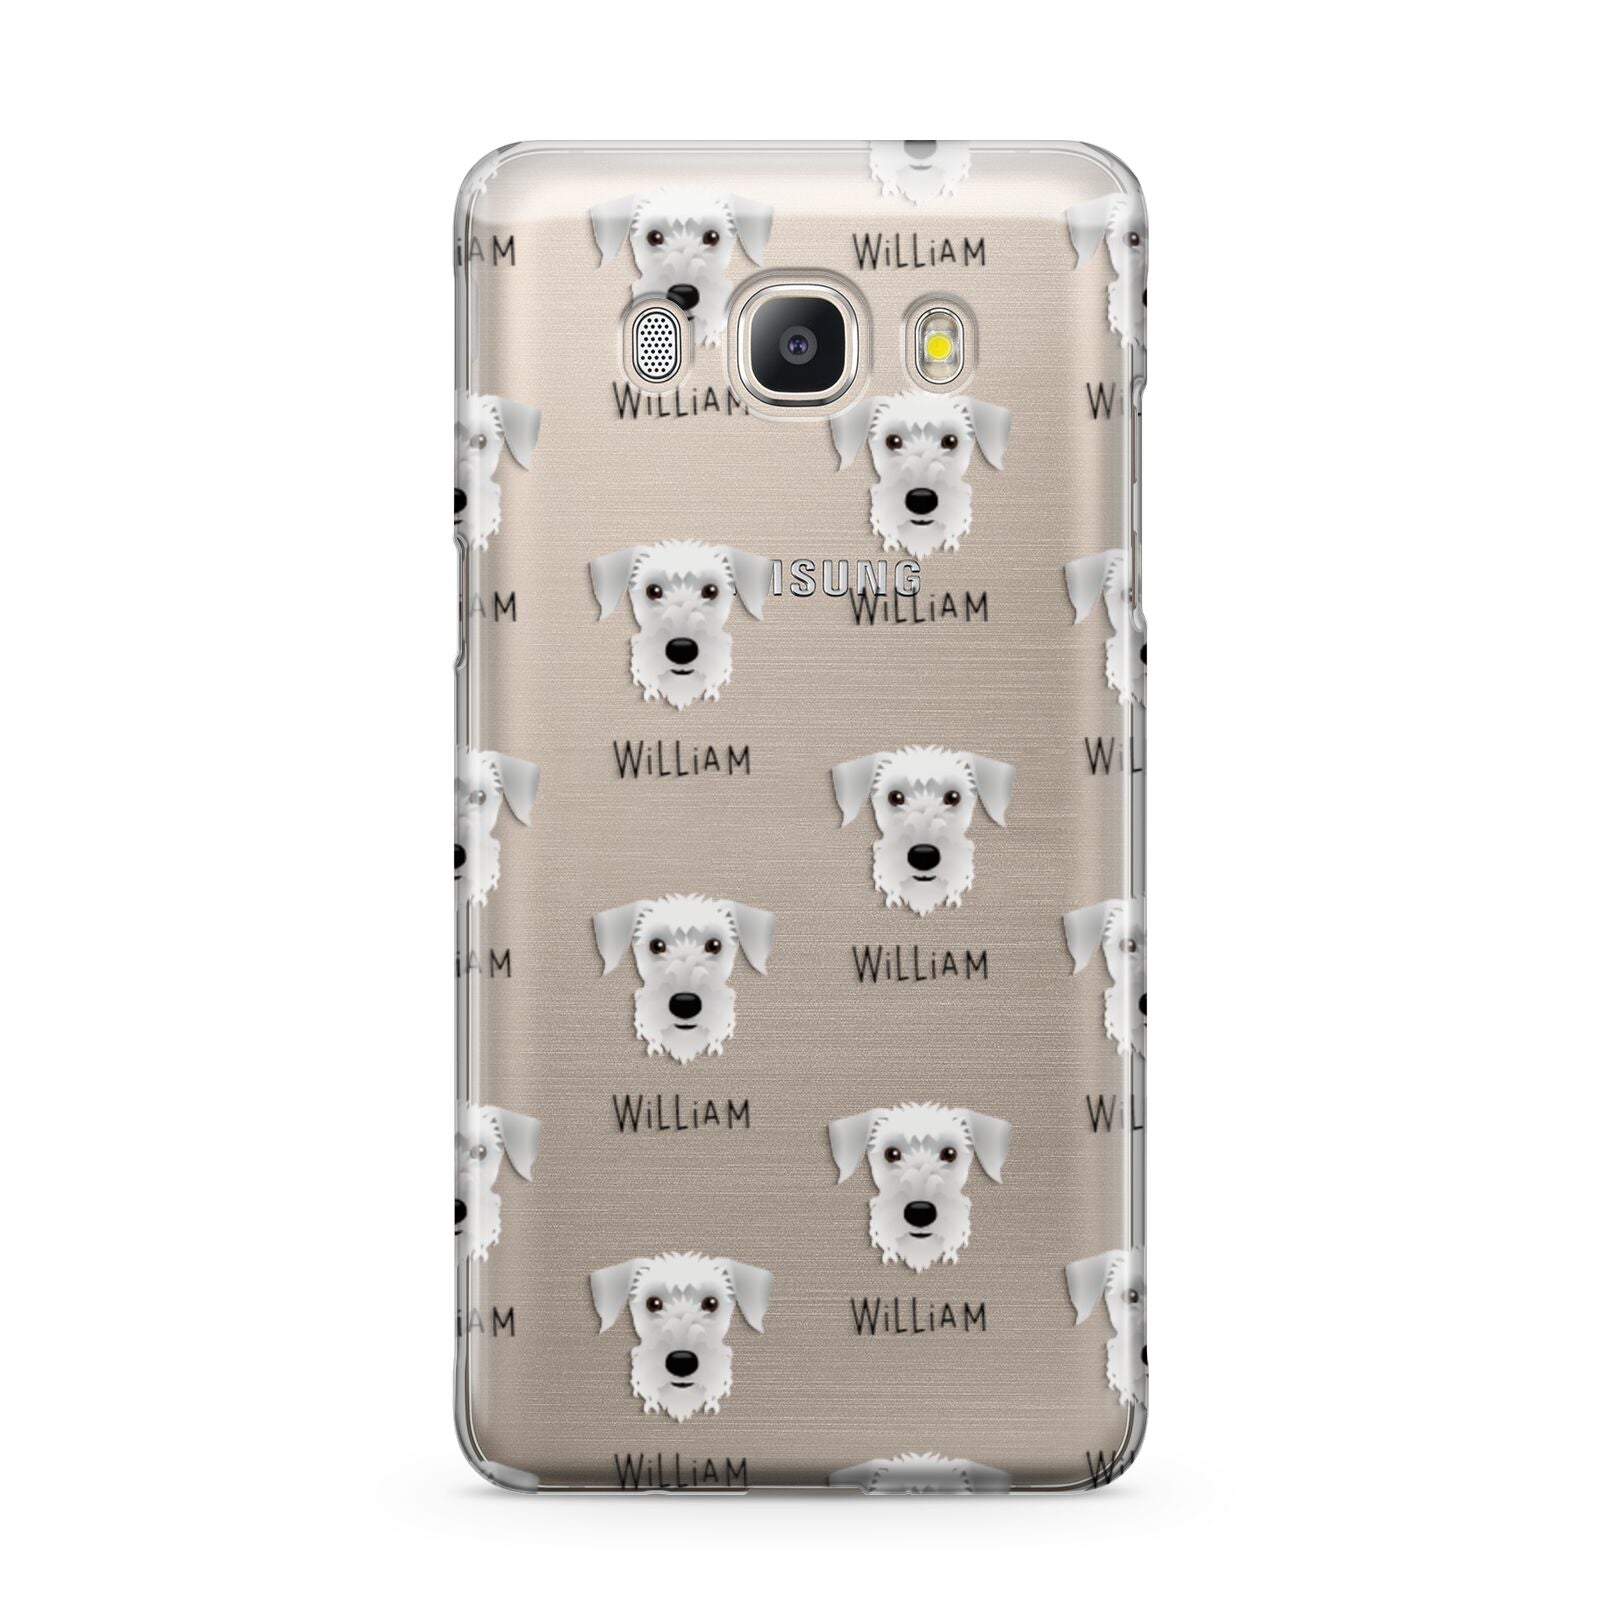 Cesky Terrier Icon with Name Samsung Galaxy J5 2016 Case